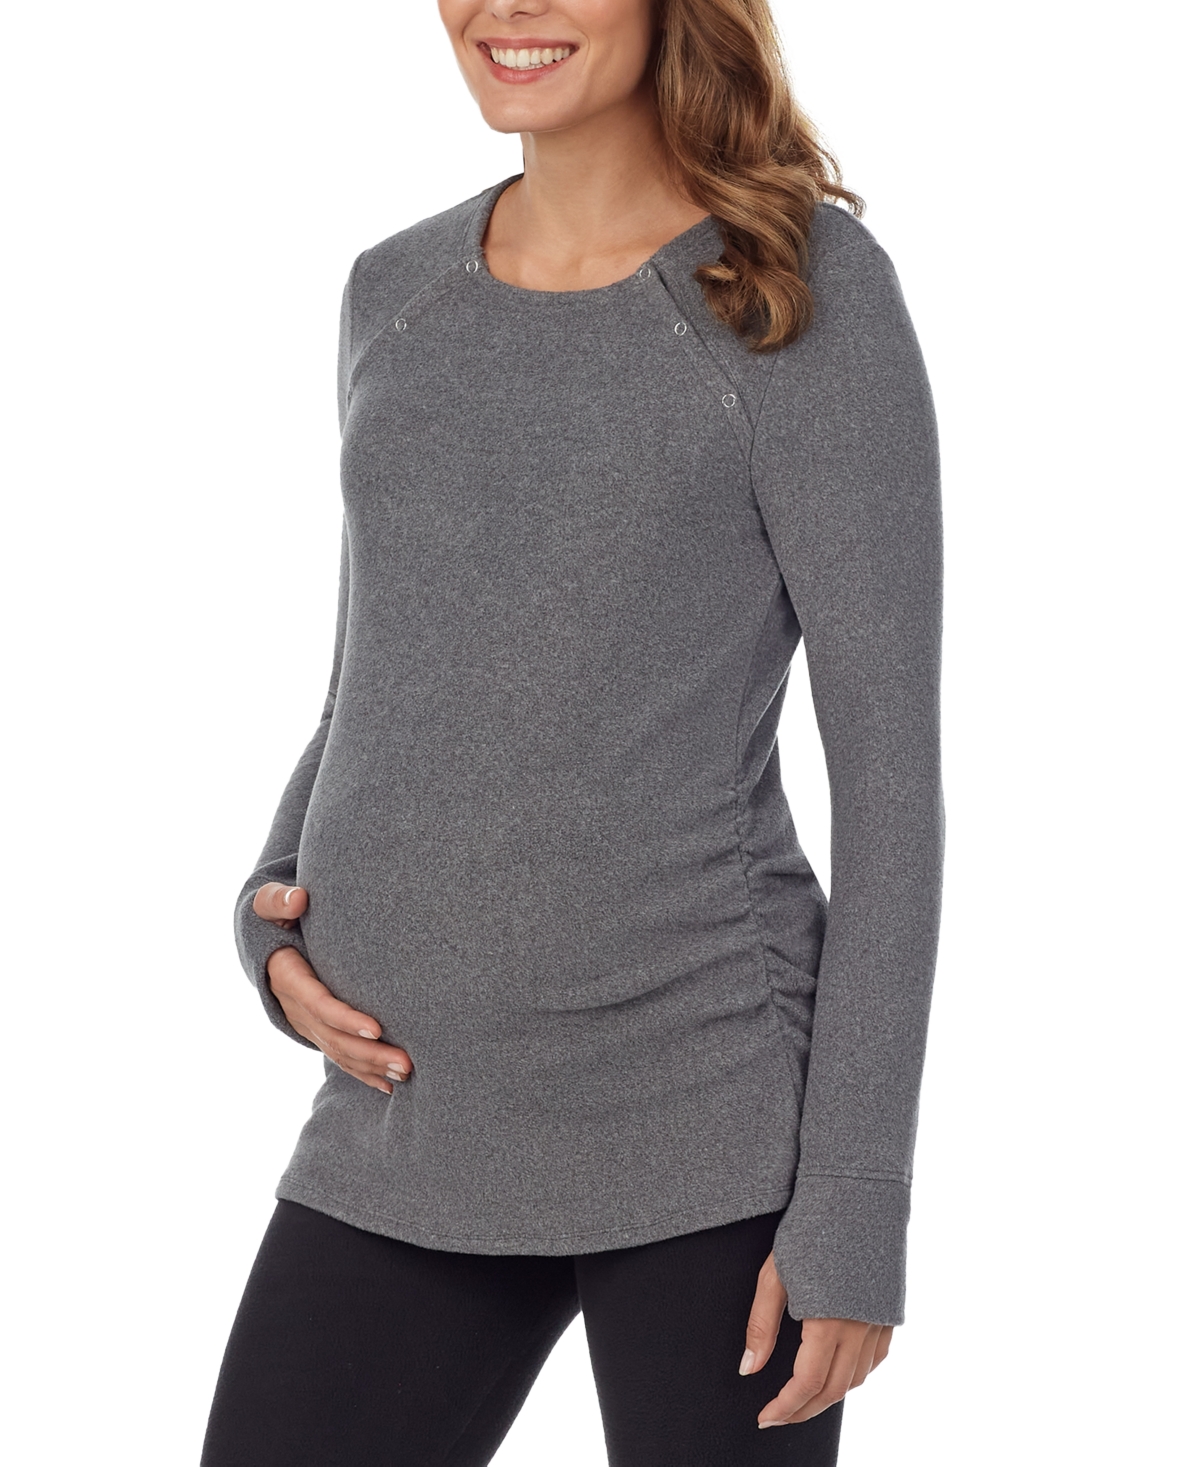 Women's Long-Sleeve Snap-Front Maternity Top - Black